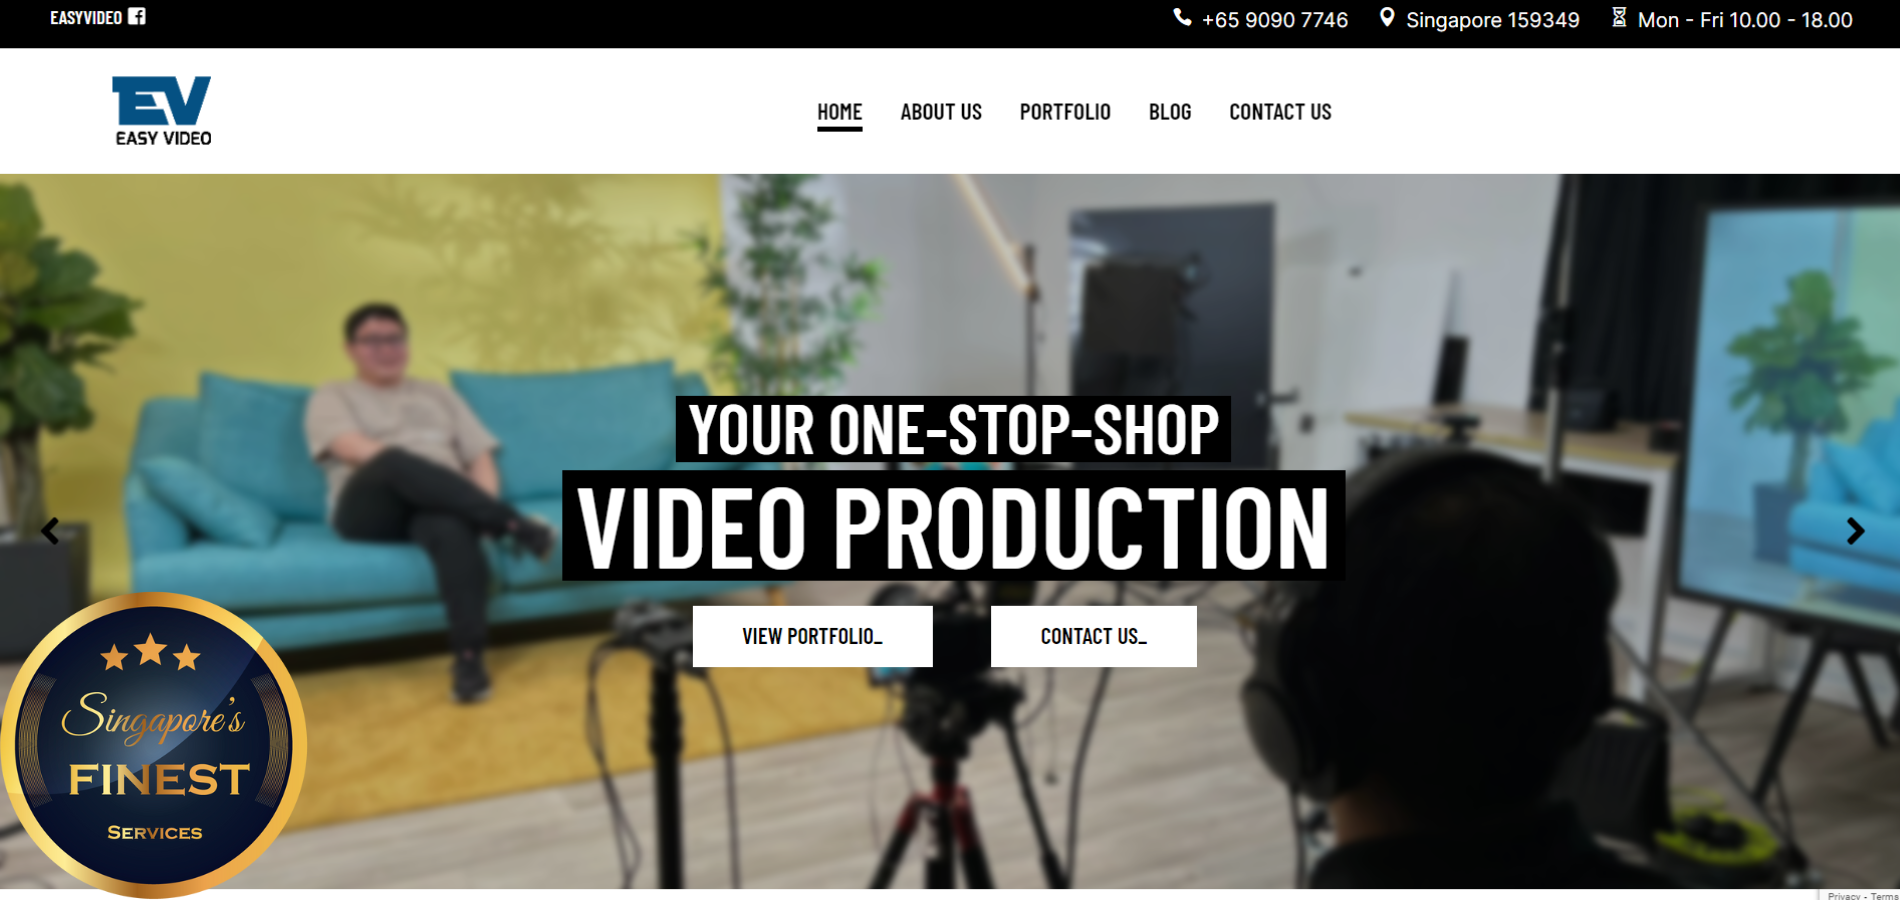 The Finest Videographers in Singapore